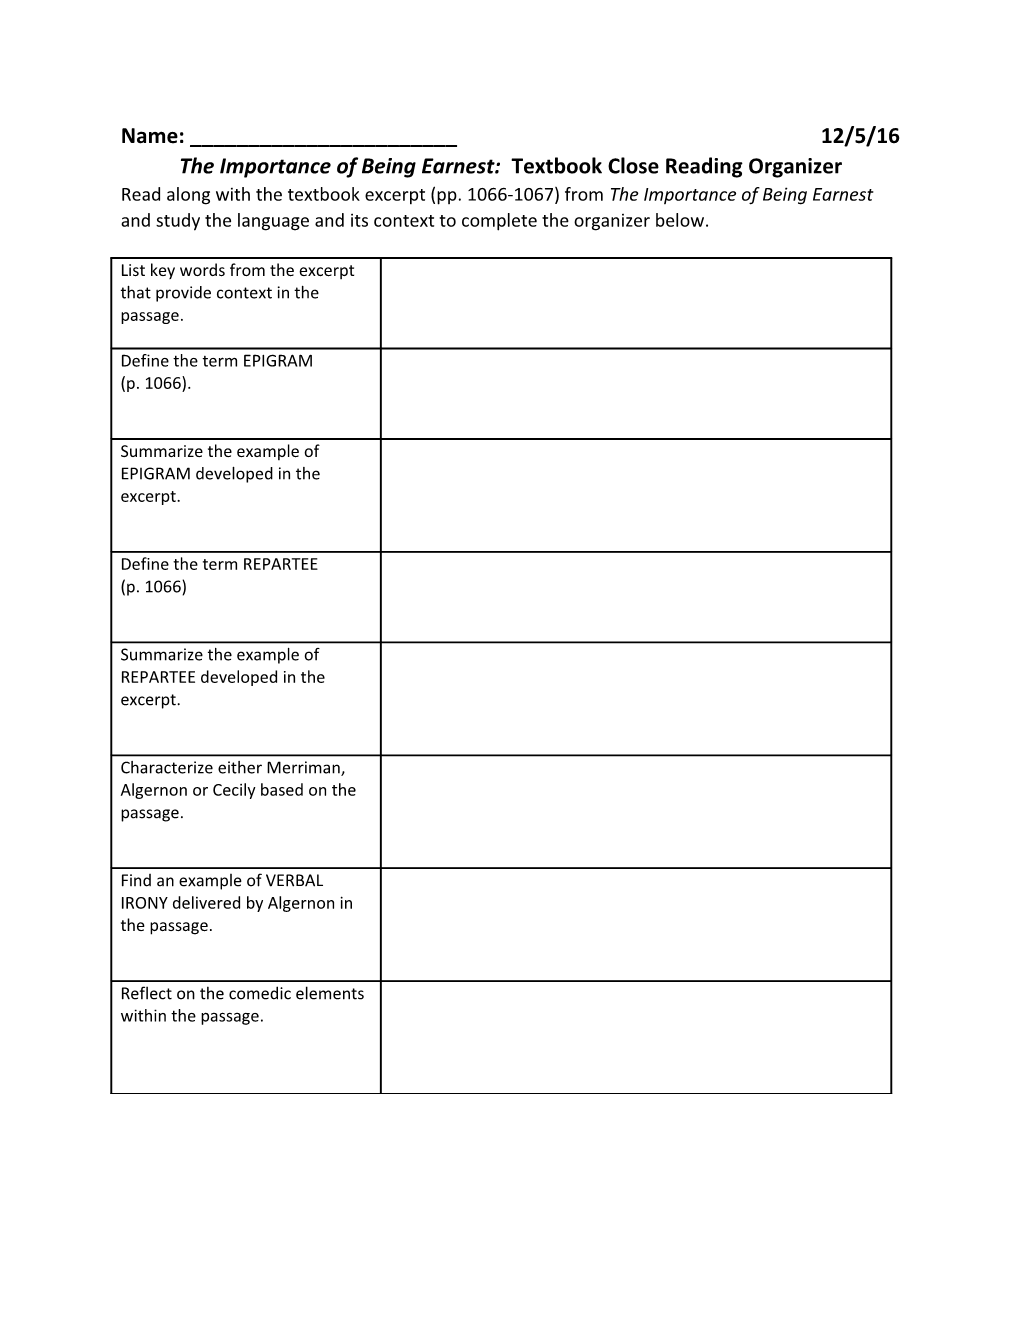 The Importance of Being Earnest: Textbook Close Reading Organizer